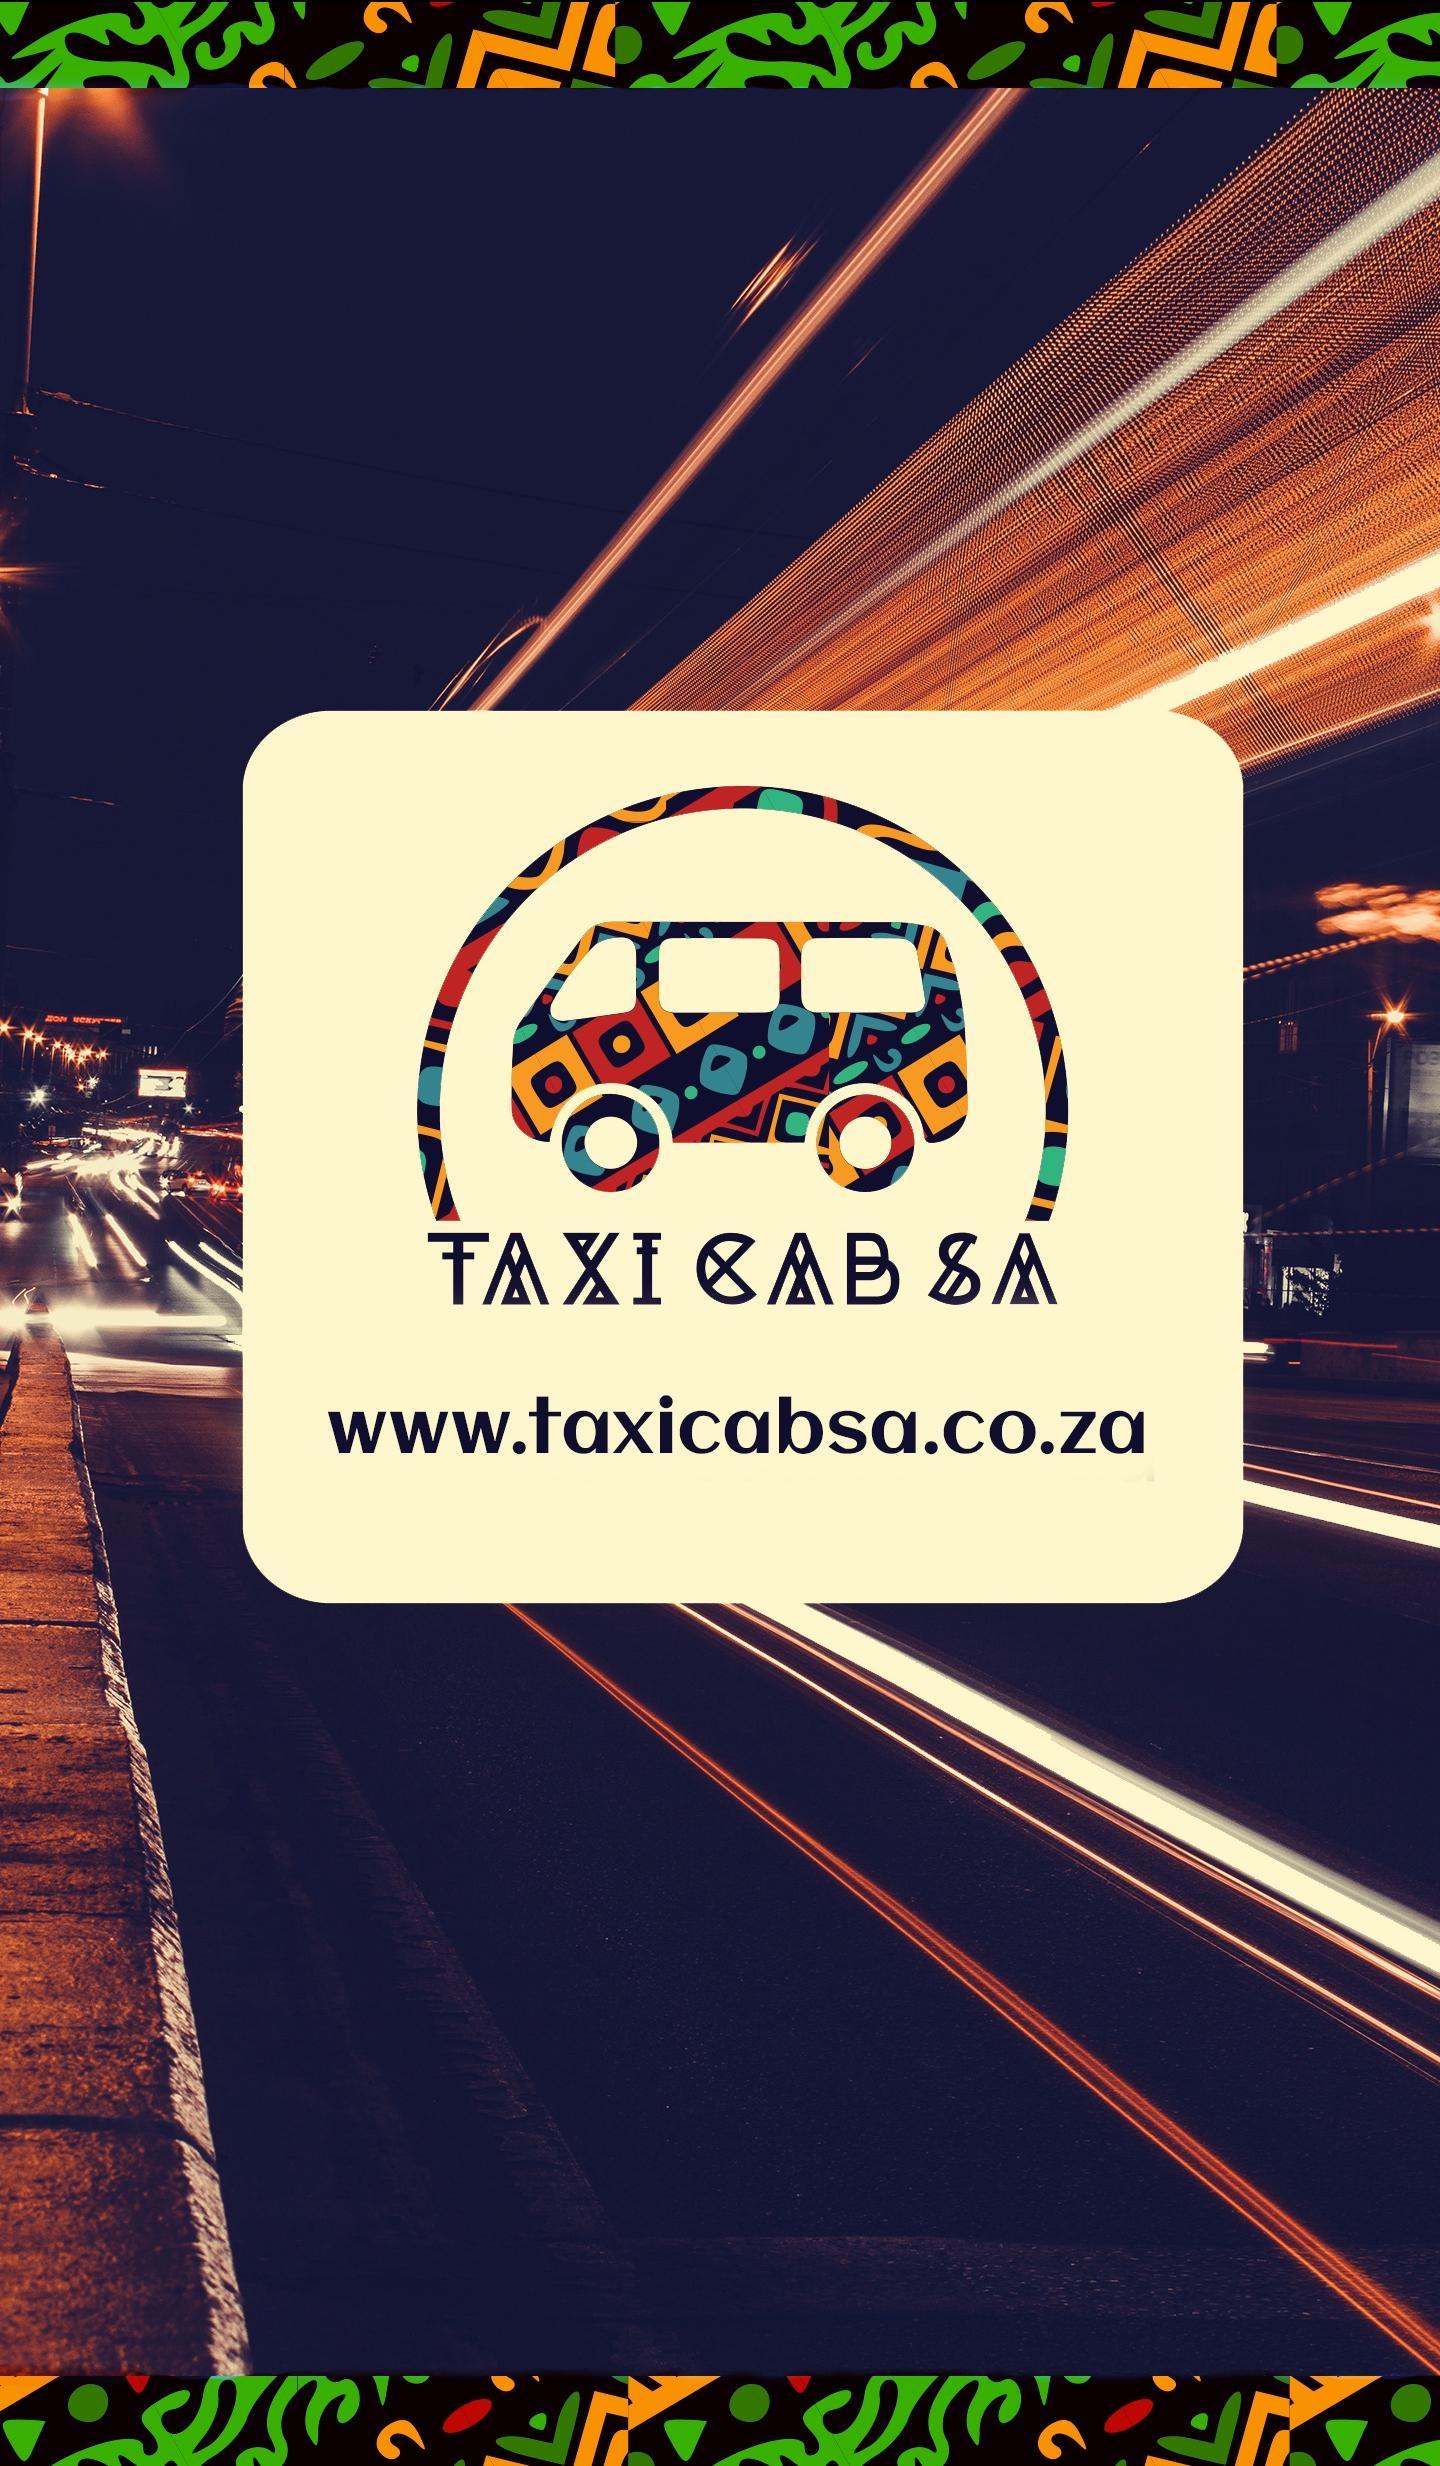 Taxi Cab SA for Android - APK Download